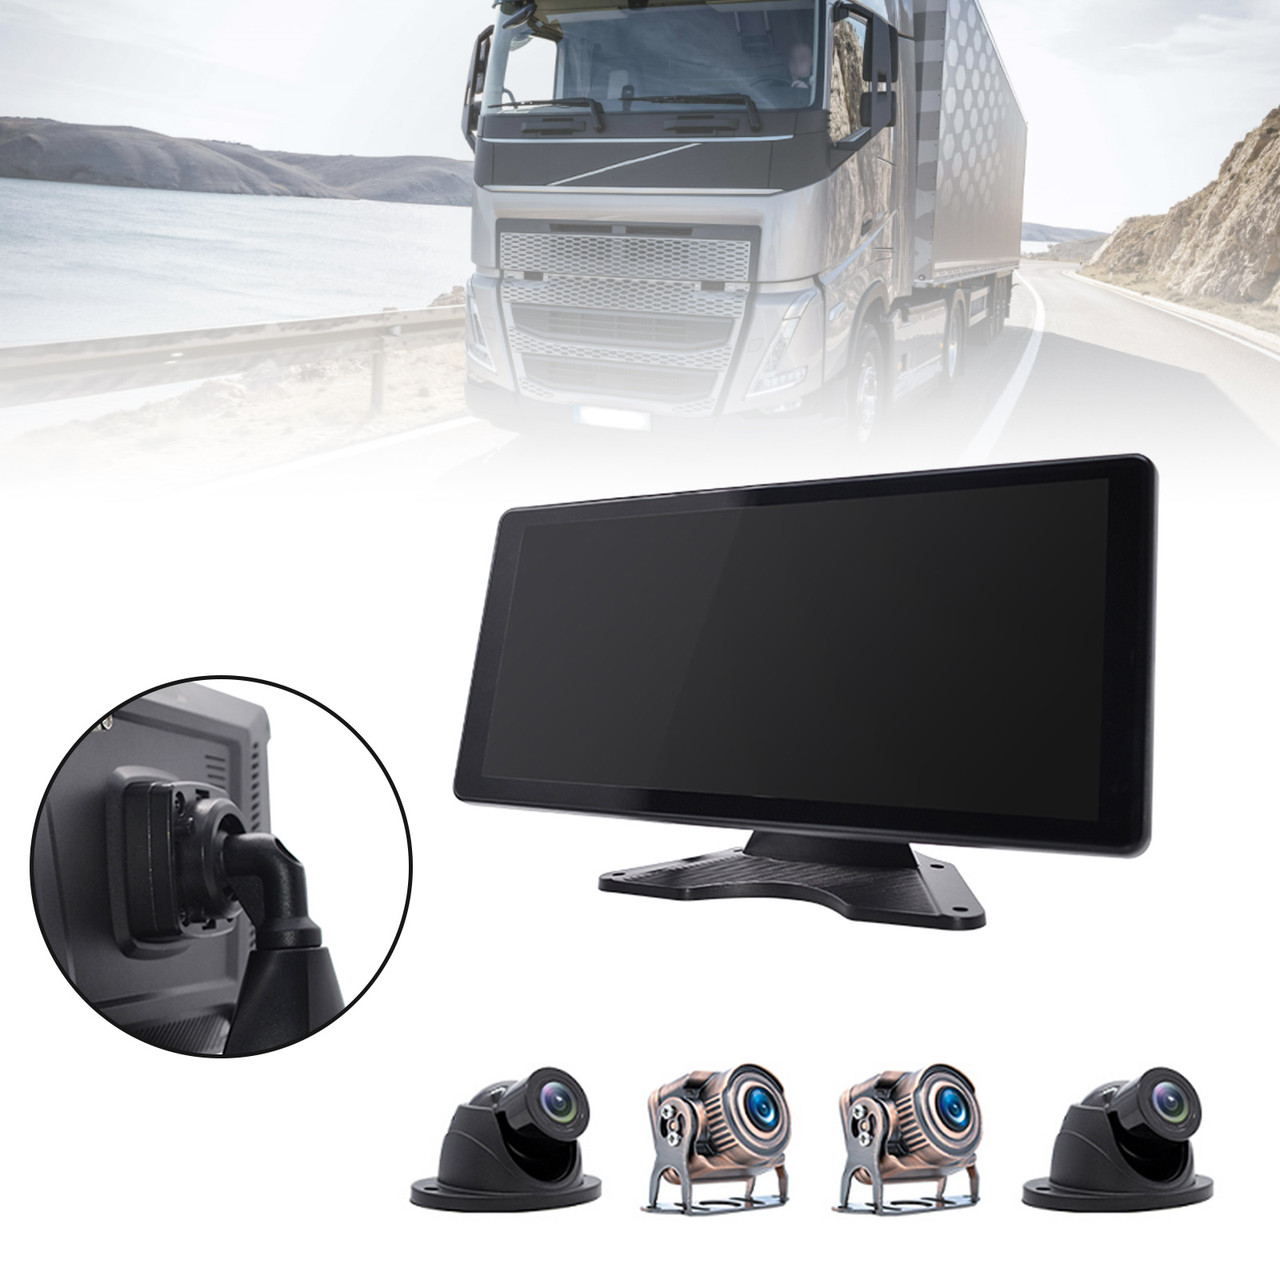 10.36" Monitor DVR Driving Video Recorder Touch Screen GPS for RV Truck Bus